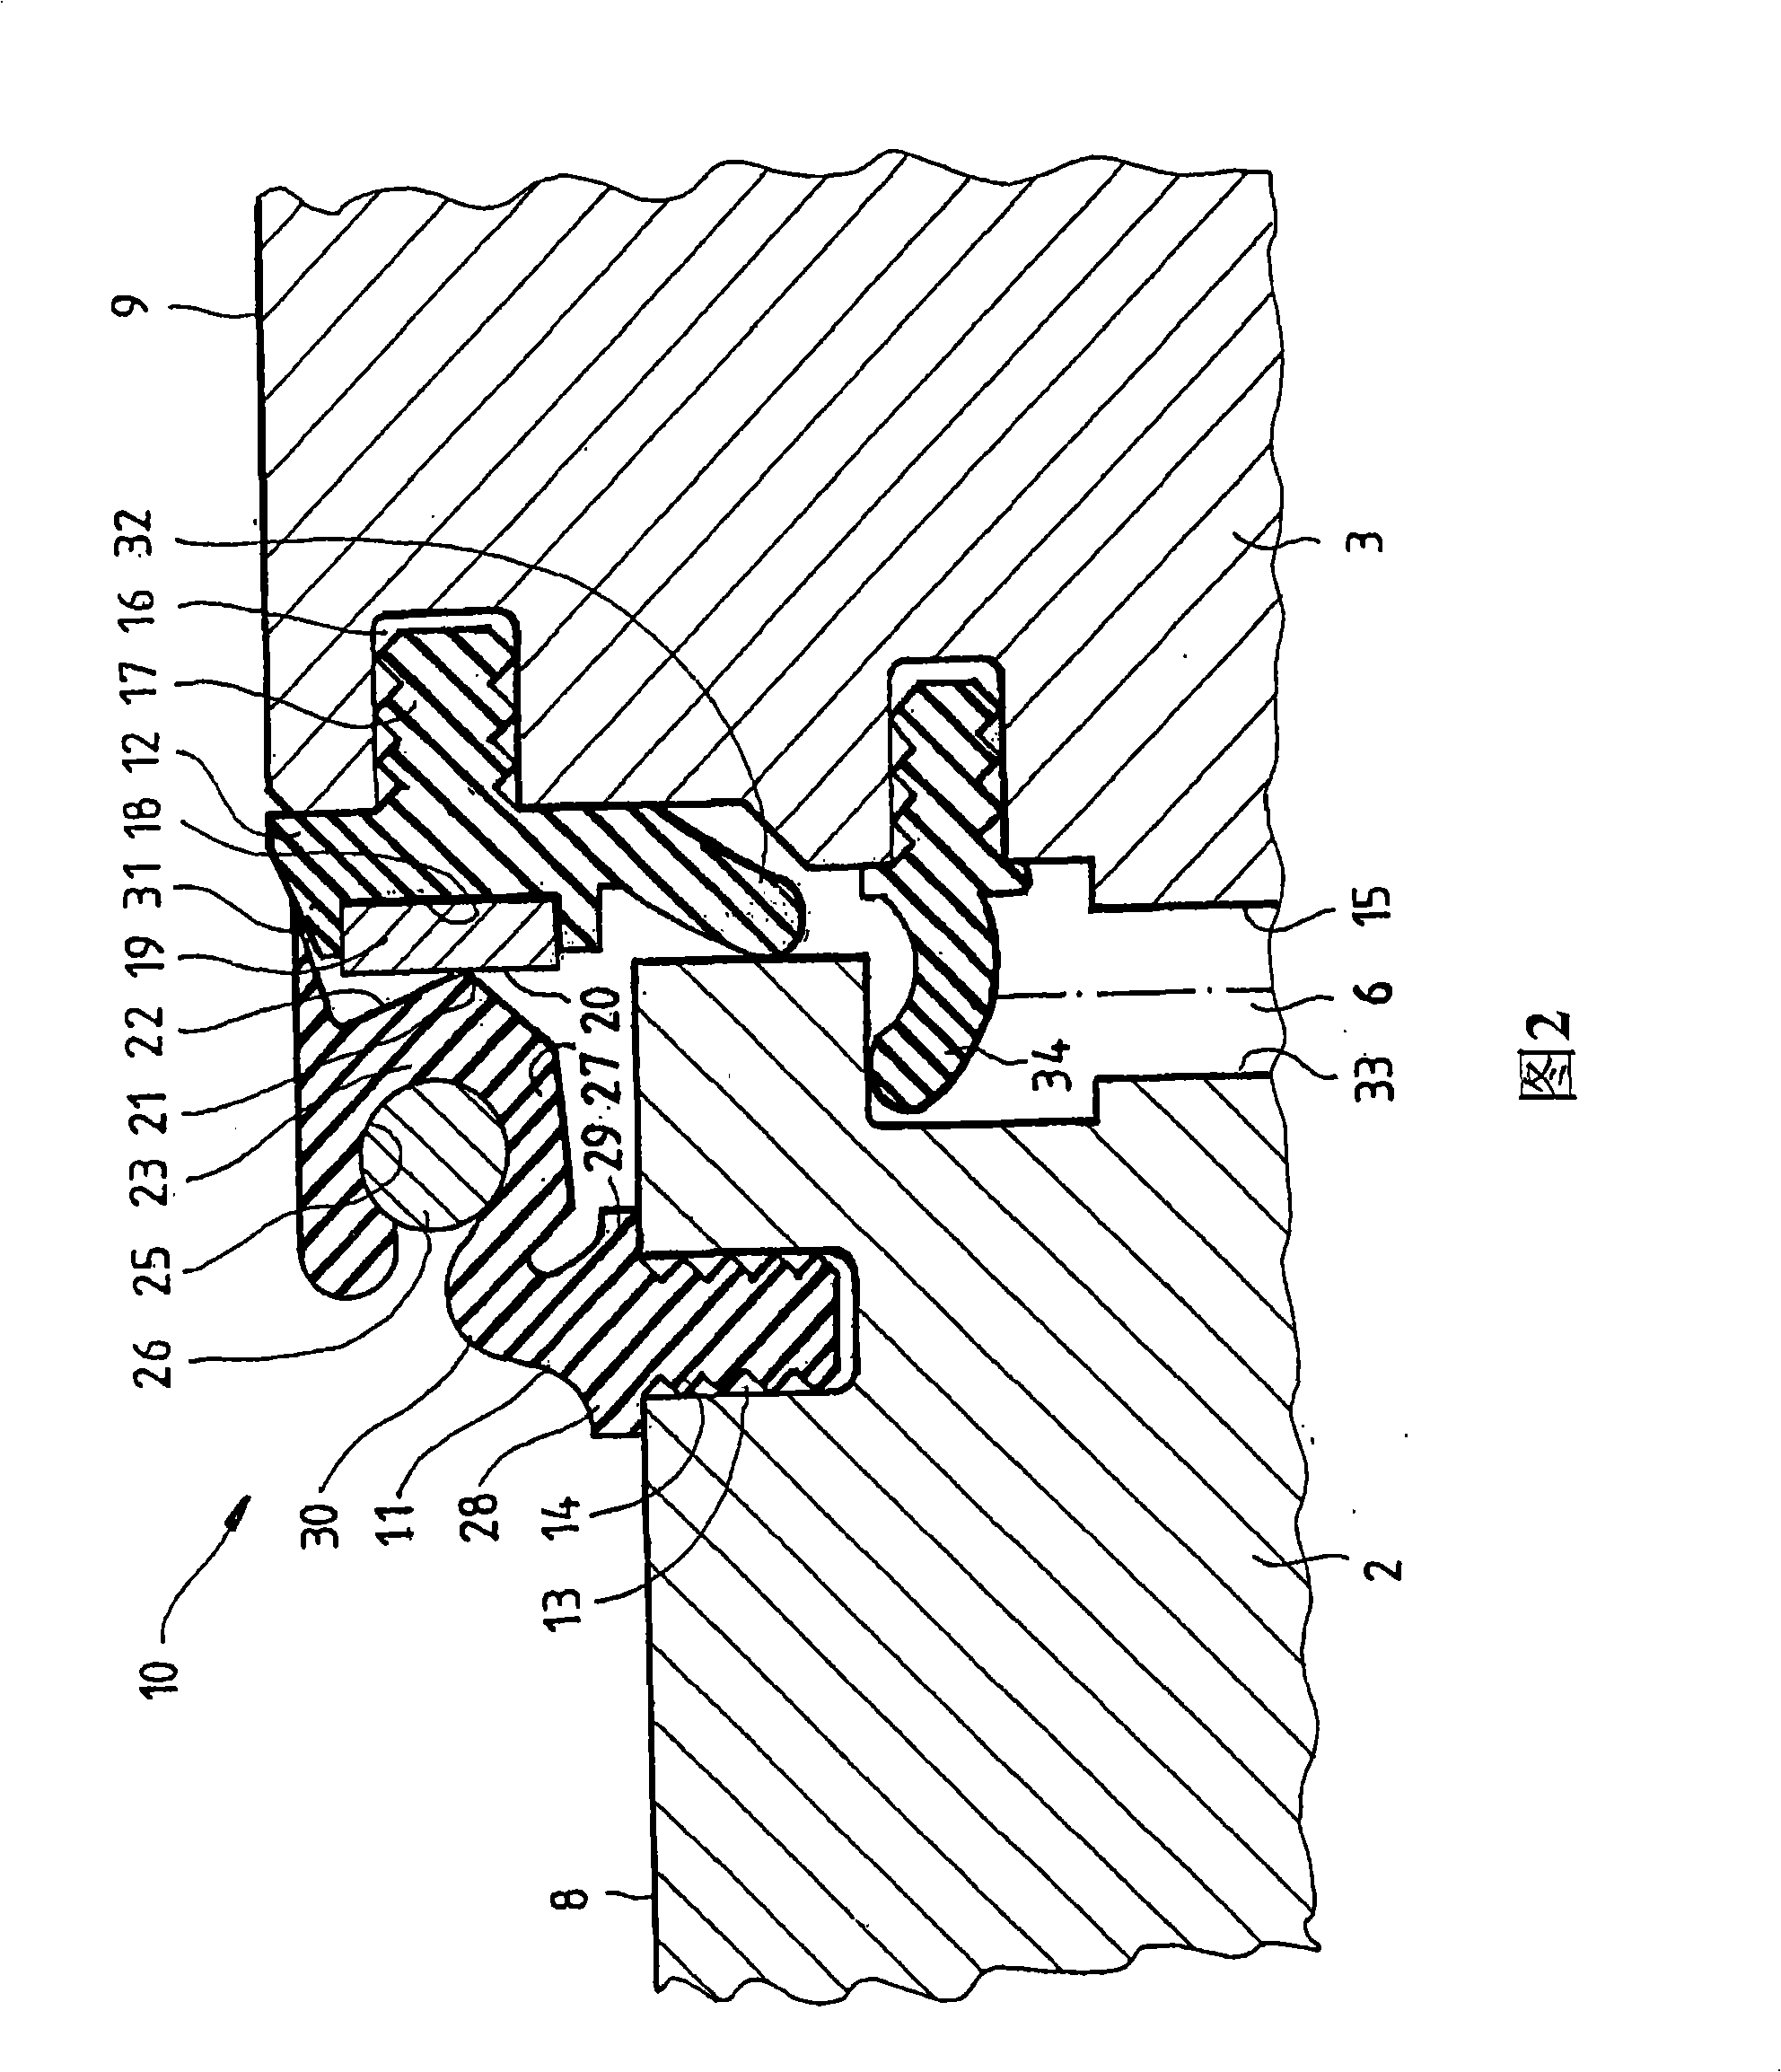 Wind turbine with element for sealing two parts that can be rotated in relation to one another